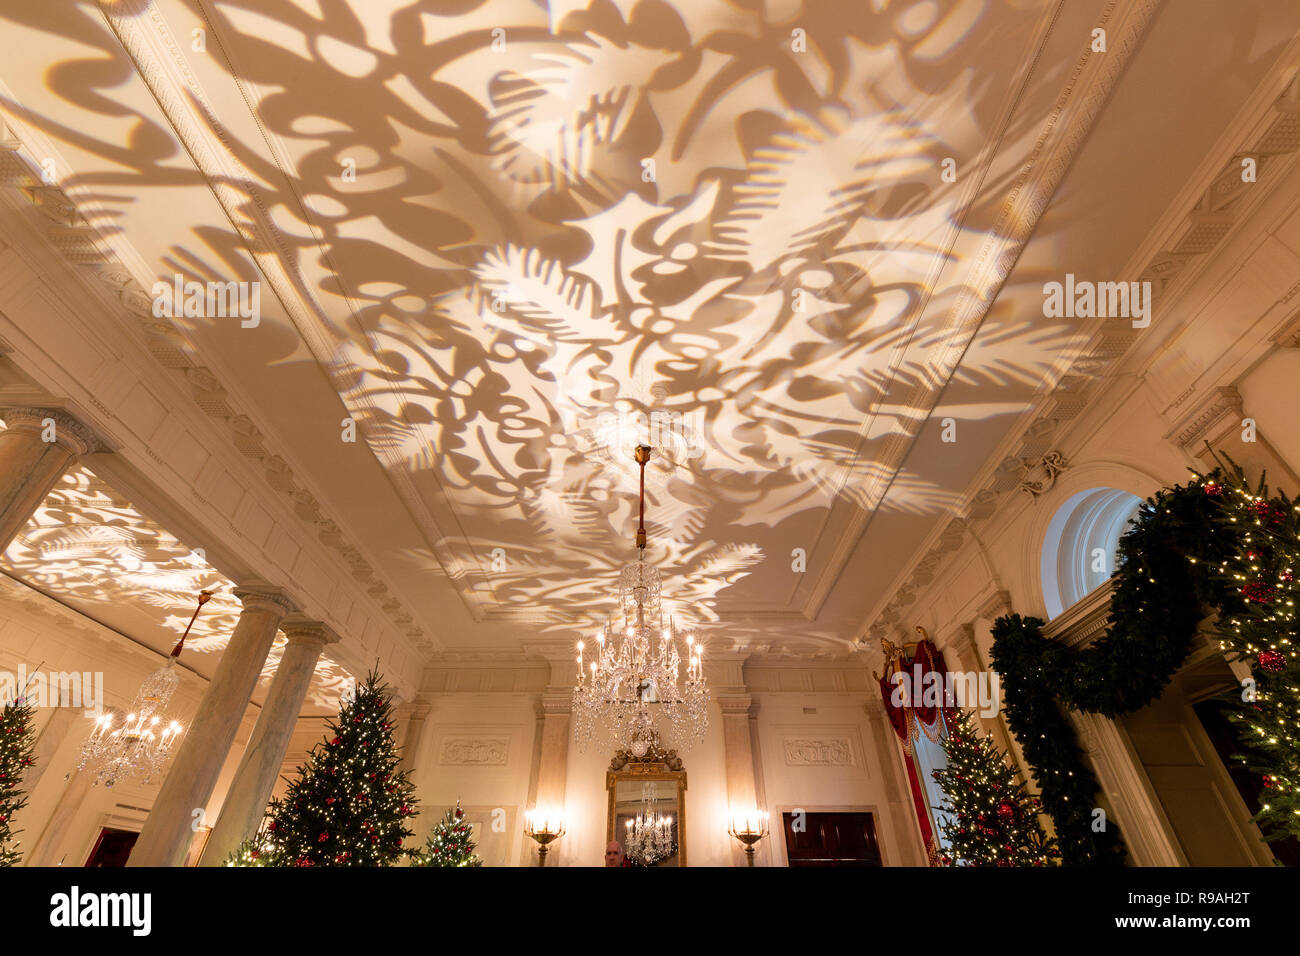 Special Christmas Lighting Decorates The Ceiling In The Grand